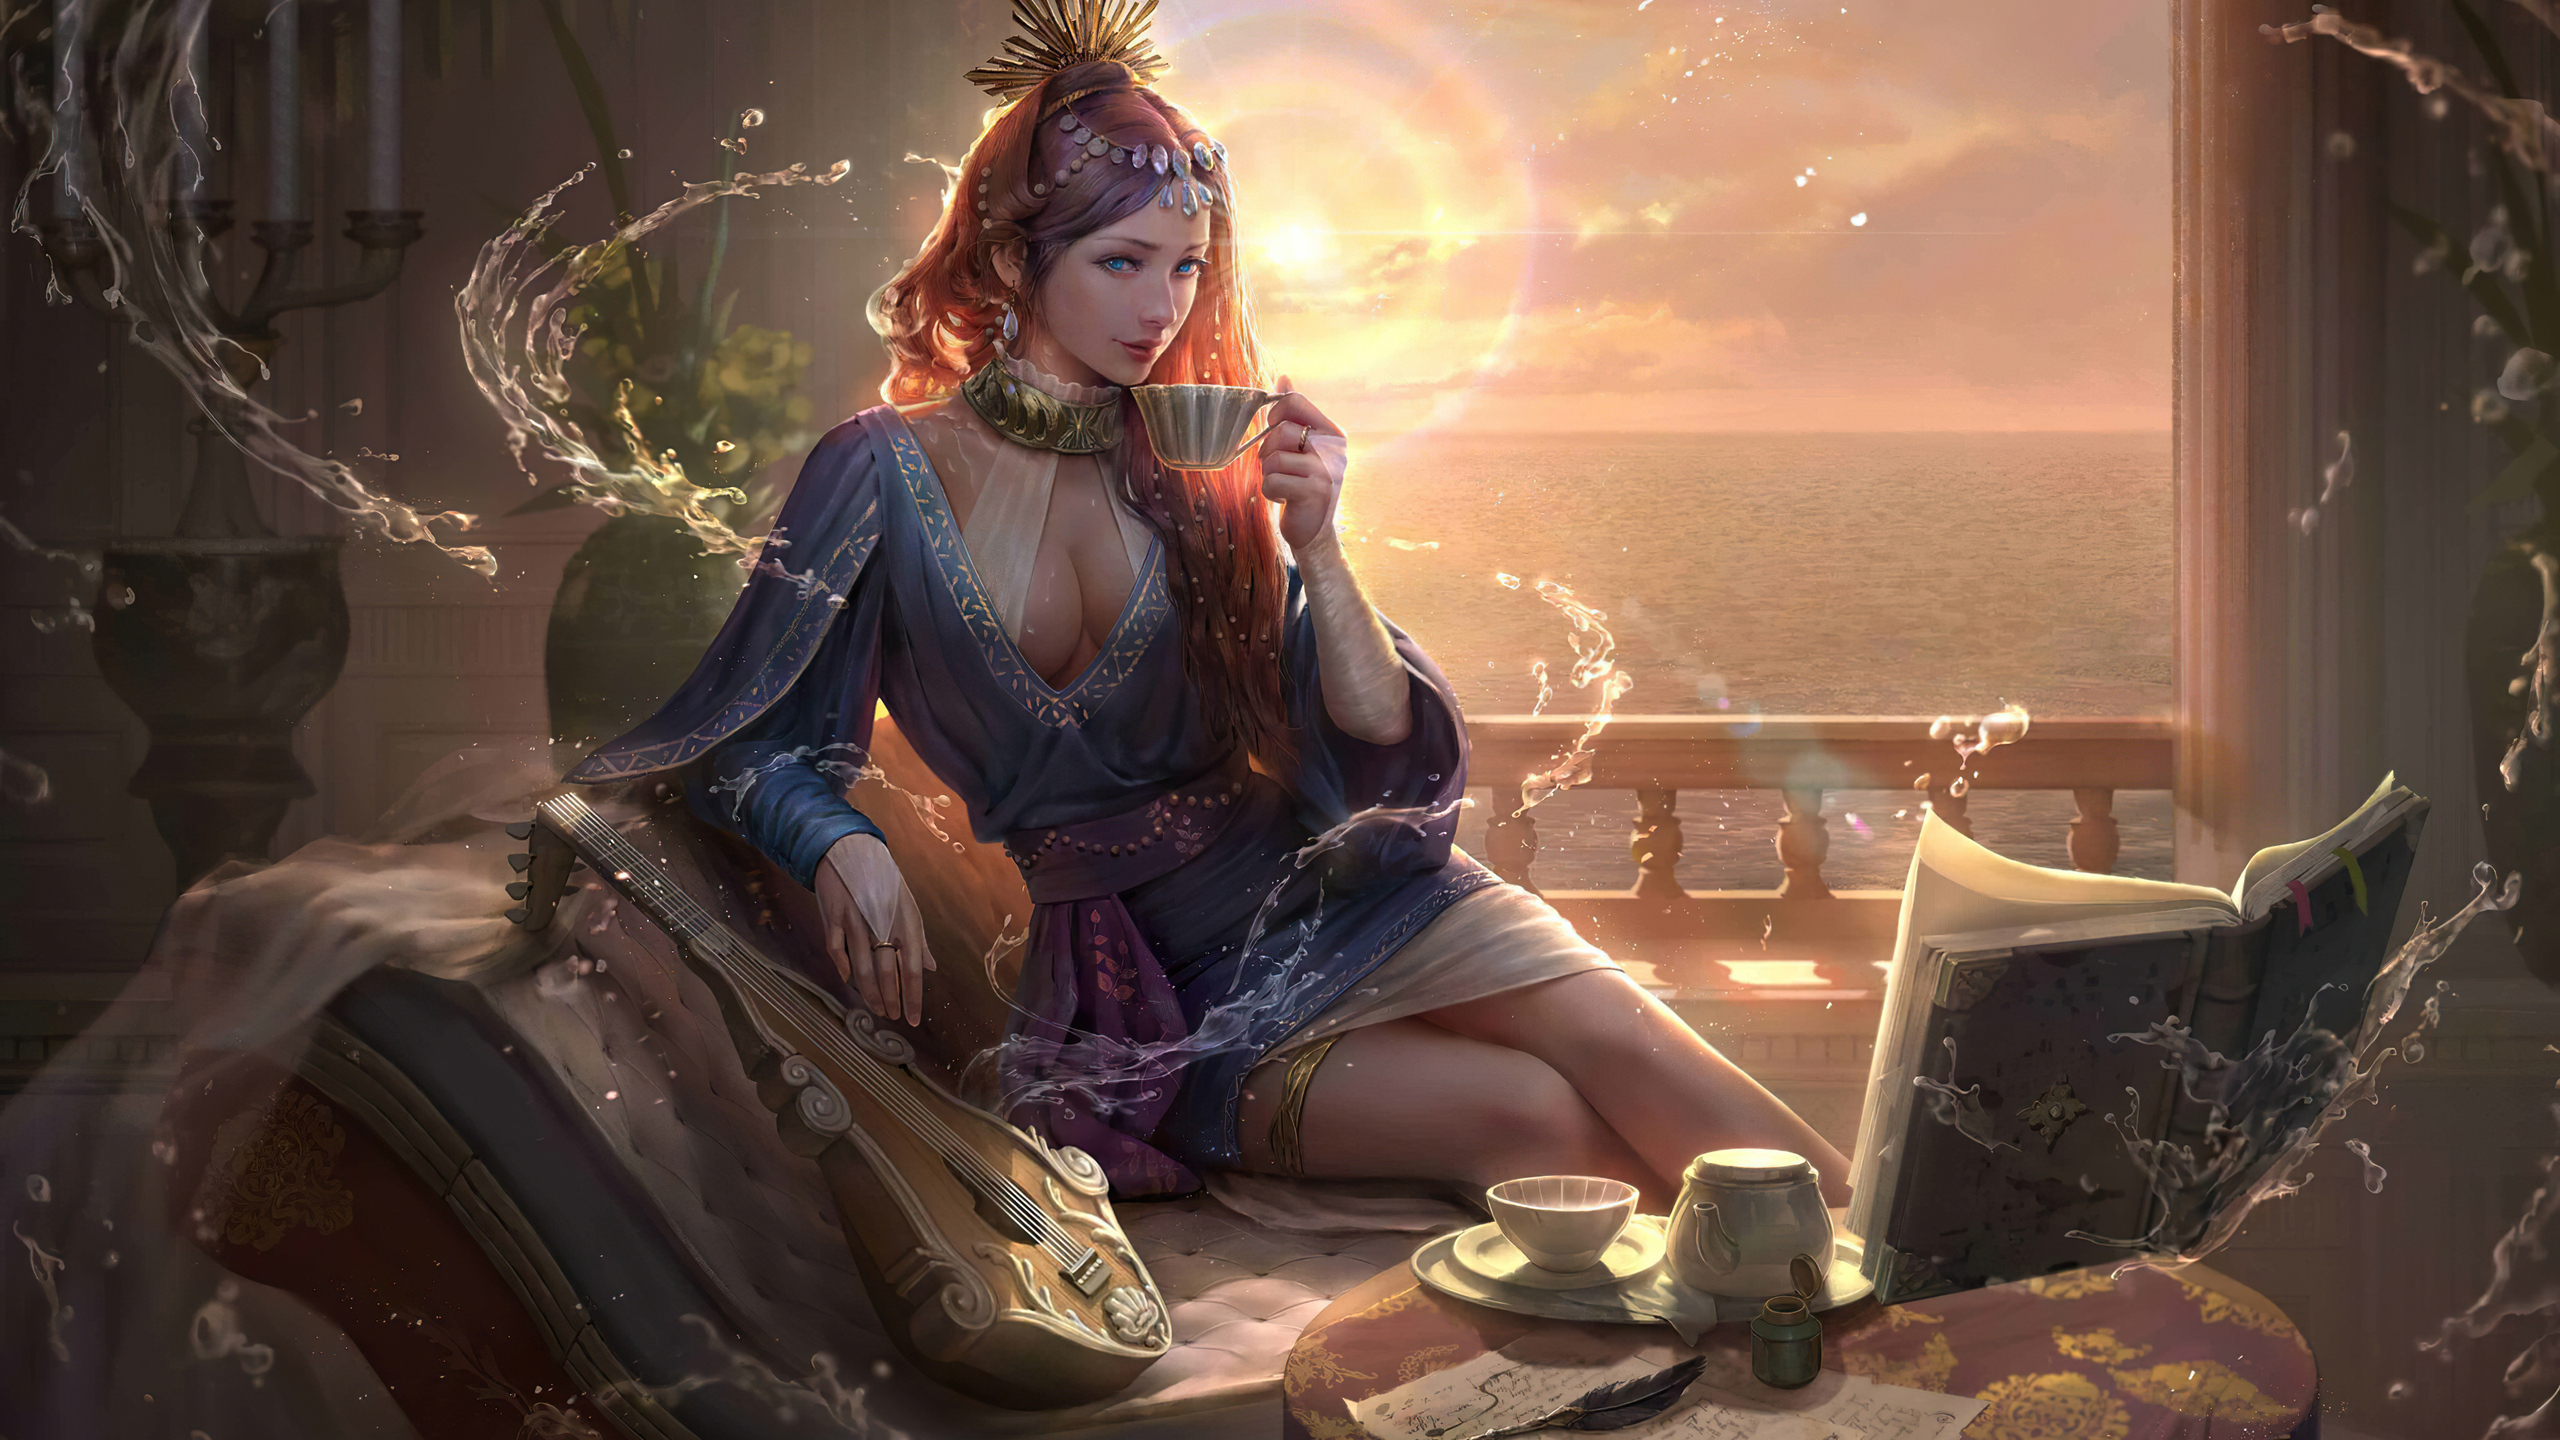 2560x1440 Queen Morning Coffee Fantasy 4k 1440P Resolution HD 4k Wallpapers Images Backgrounds 